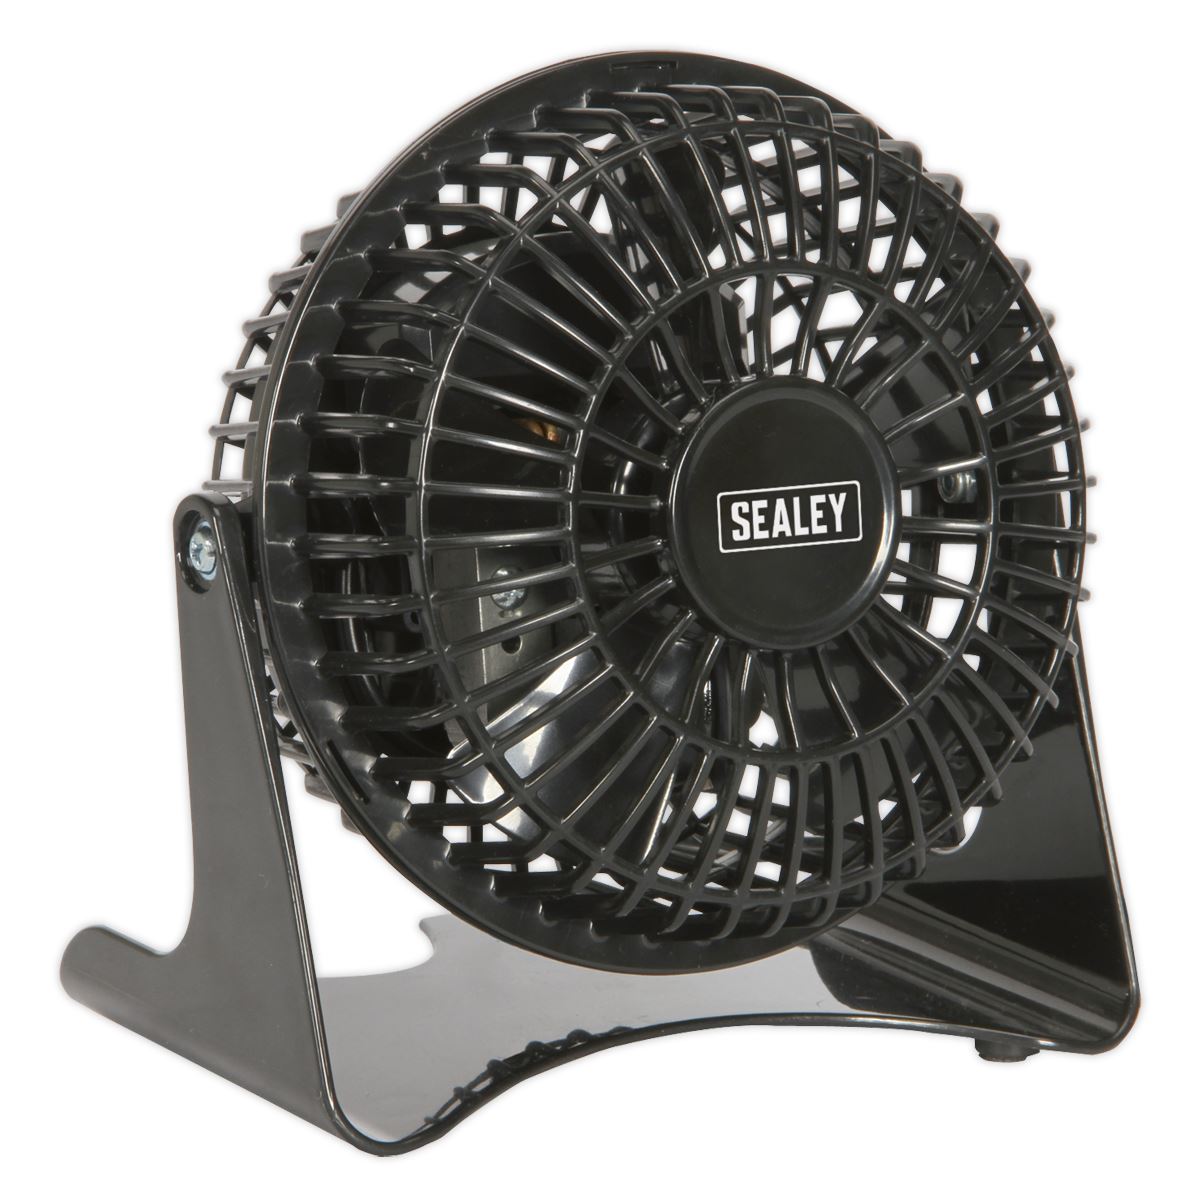 Sealey 4" Mini Desk Fan 230V Bedside Table Air Conditioning Summer Pivoting